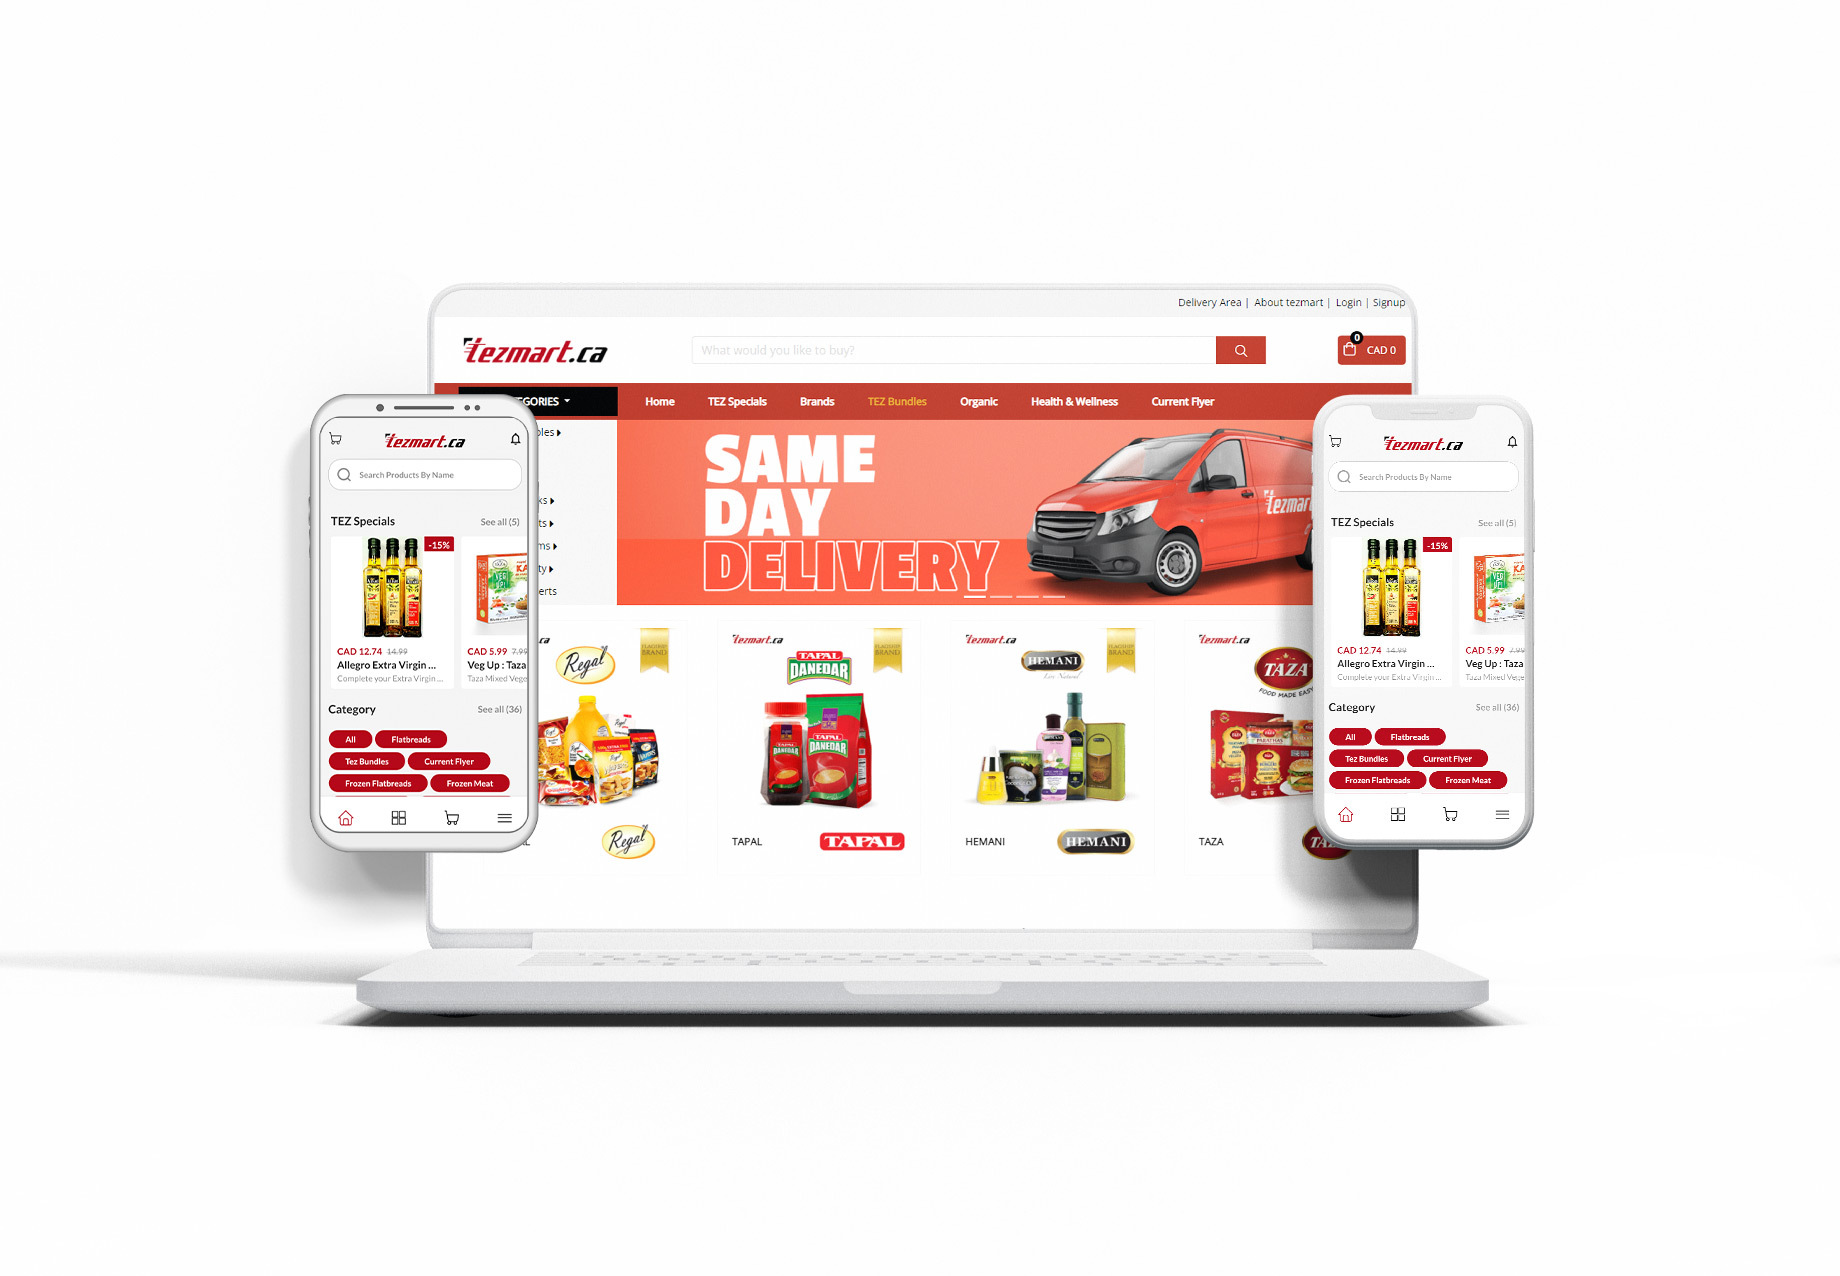 Tezmart Canada's website, Android, and iOS apps powered by tossdown